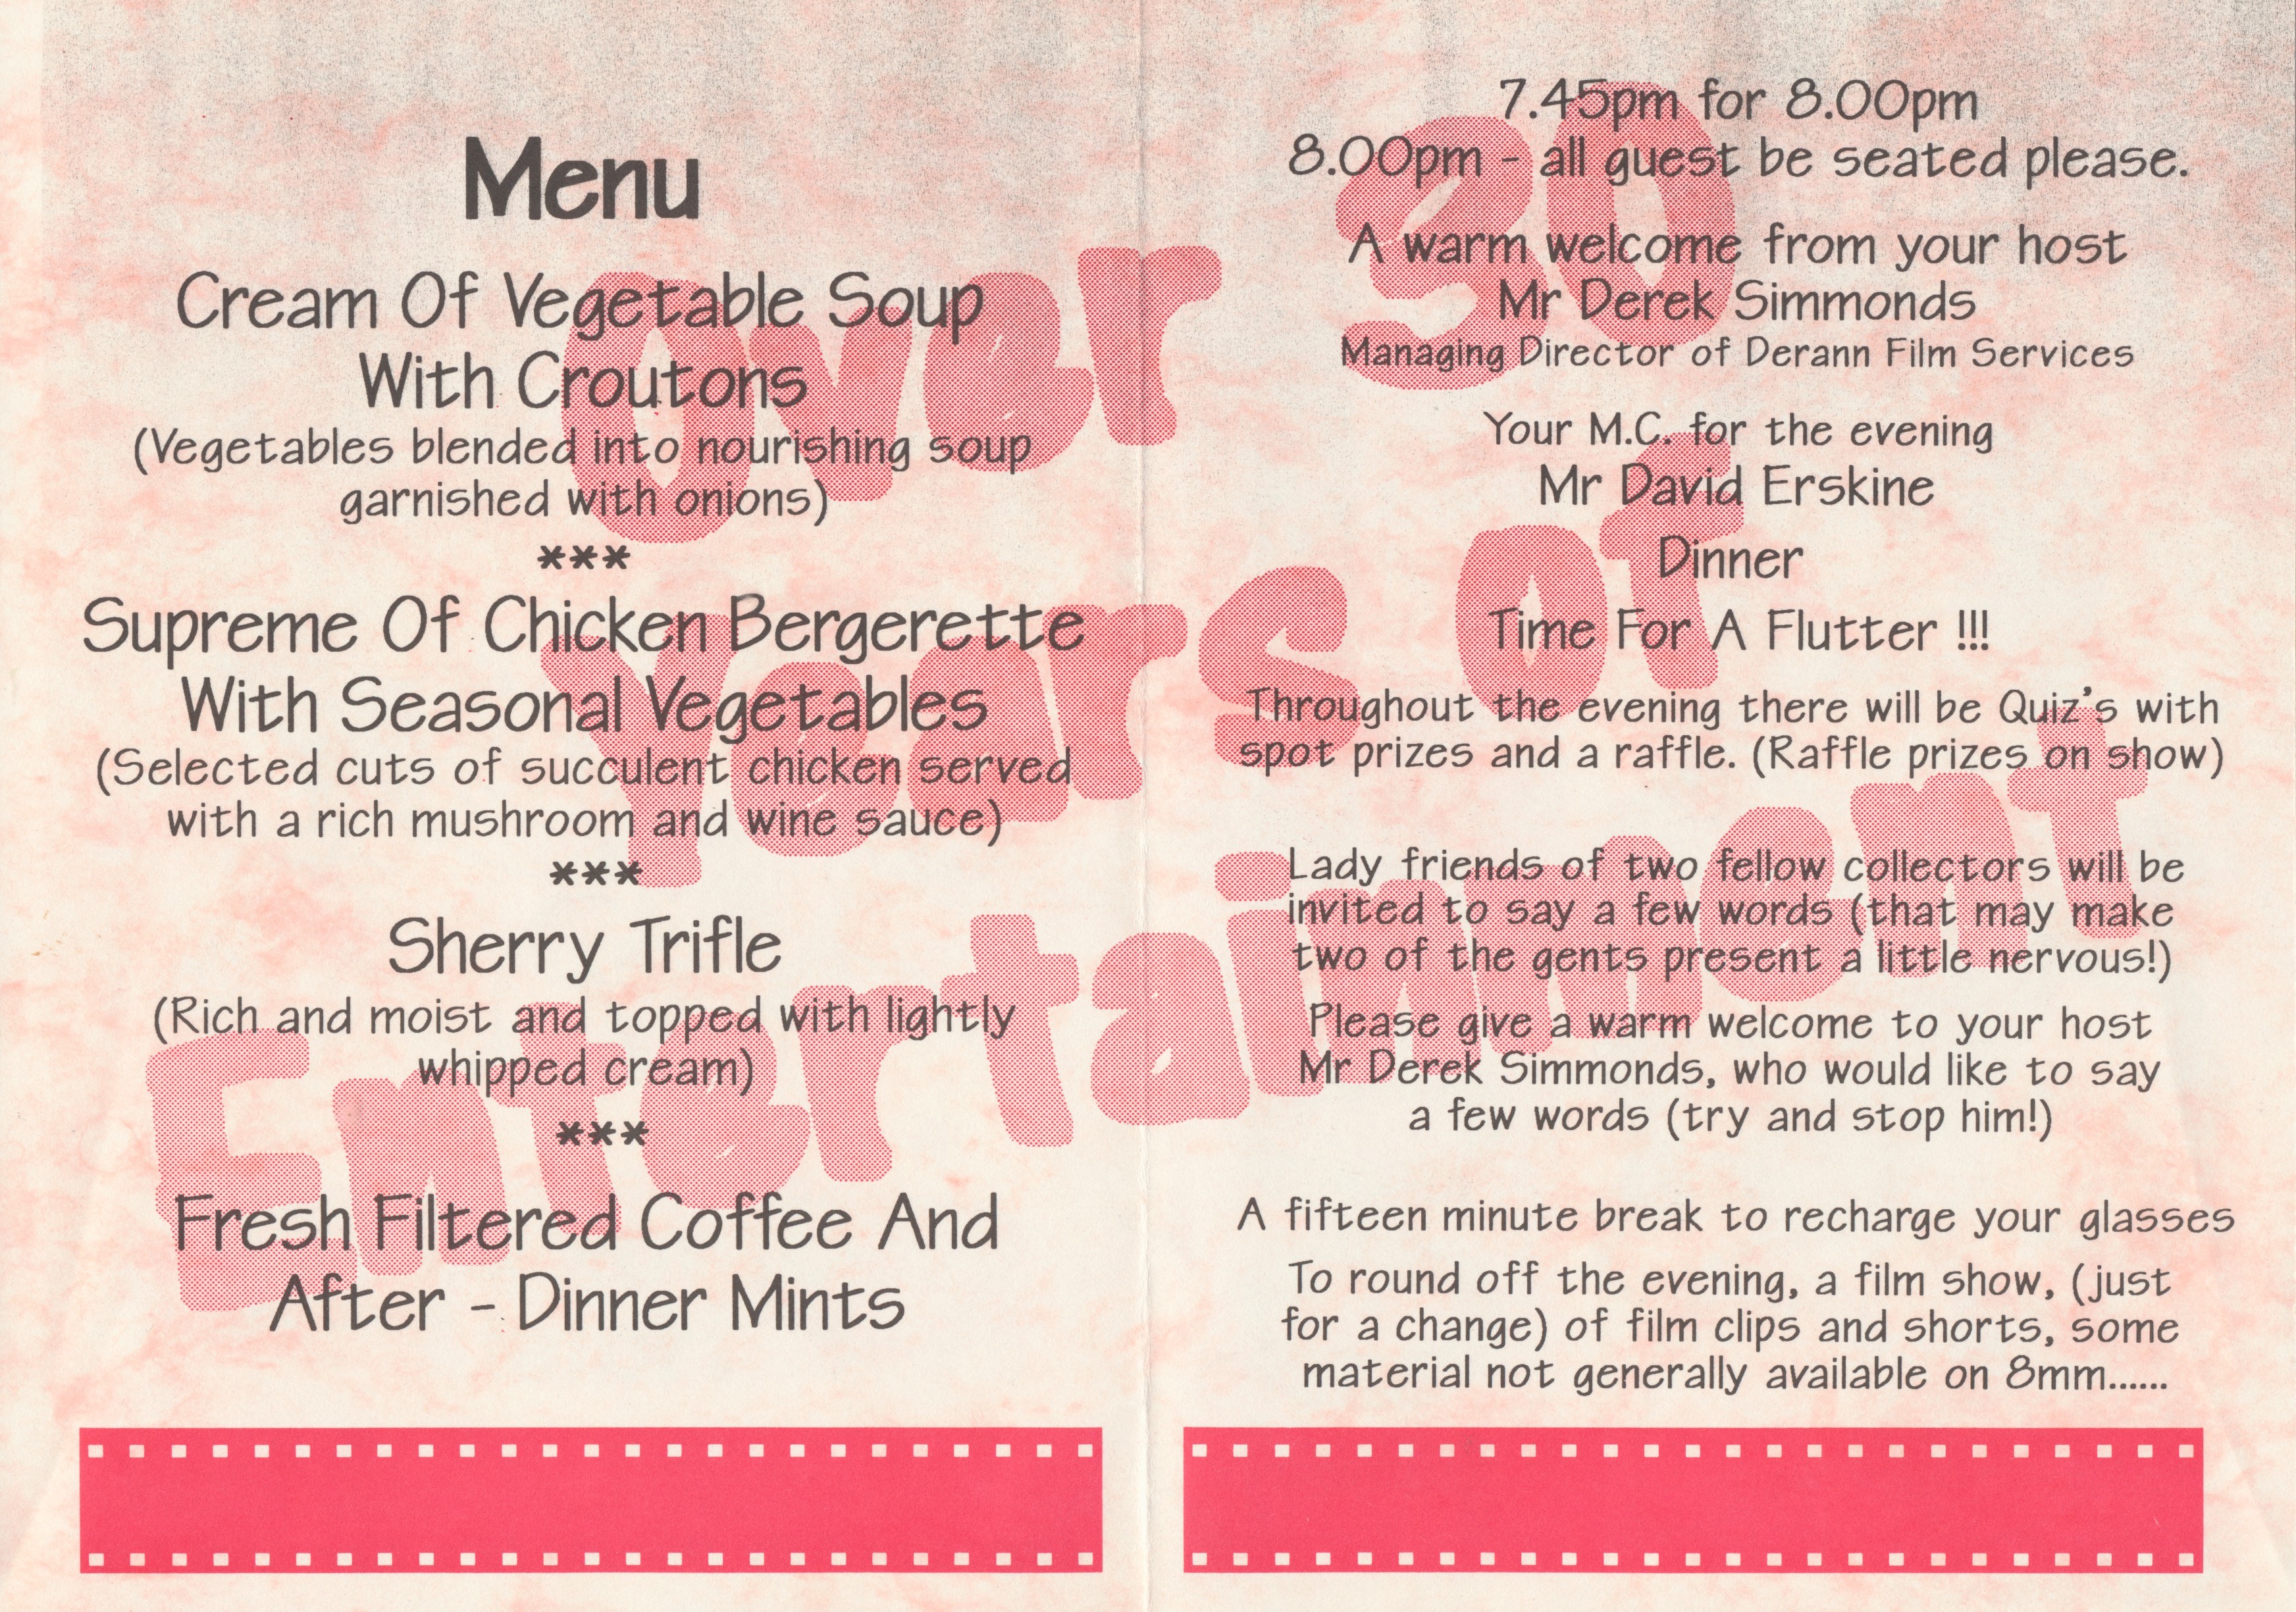 1996 Convention Dinner Programme